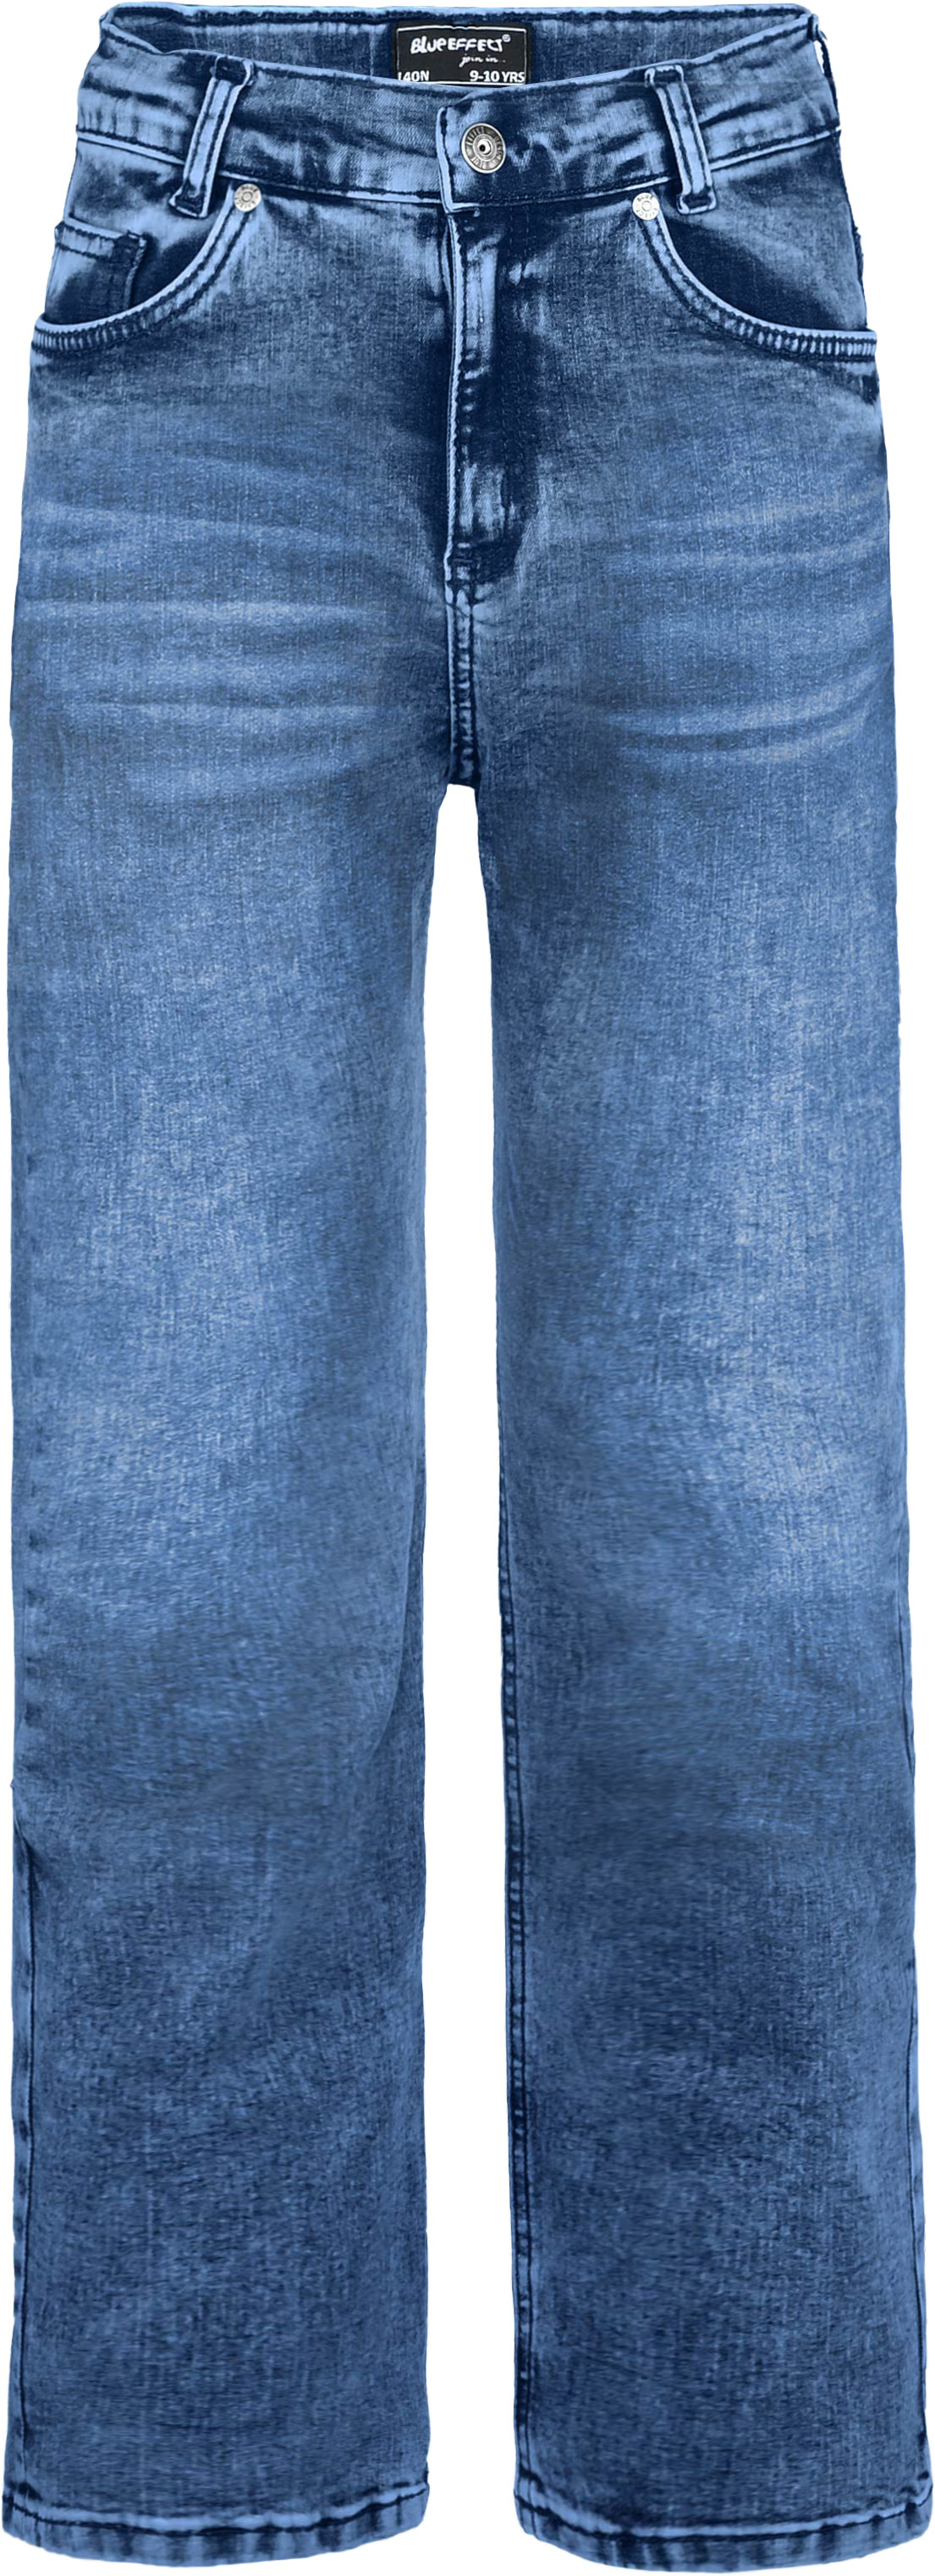 2844-NOS Boys Baggy Jeans available in Slim,Normal 